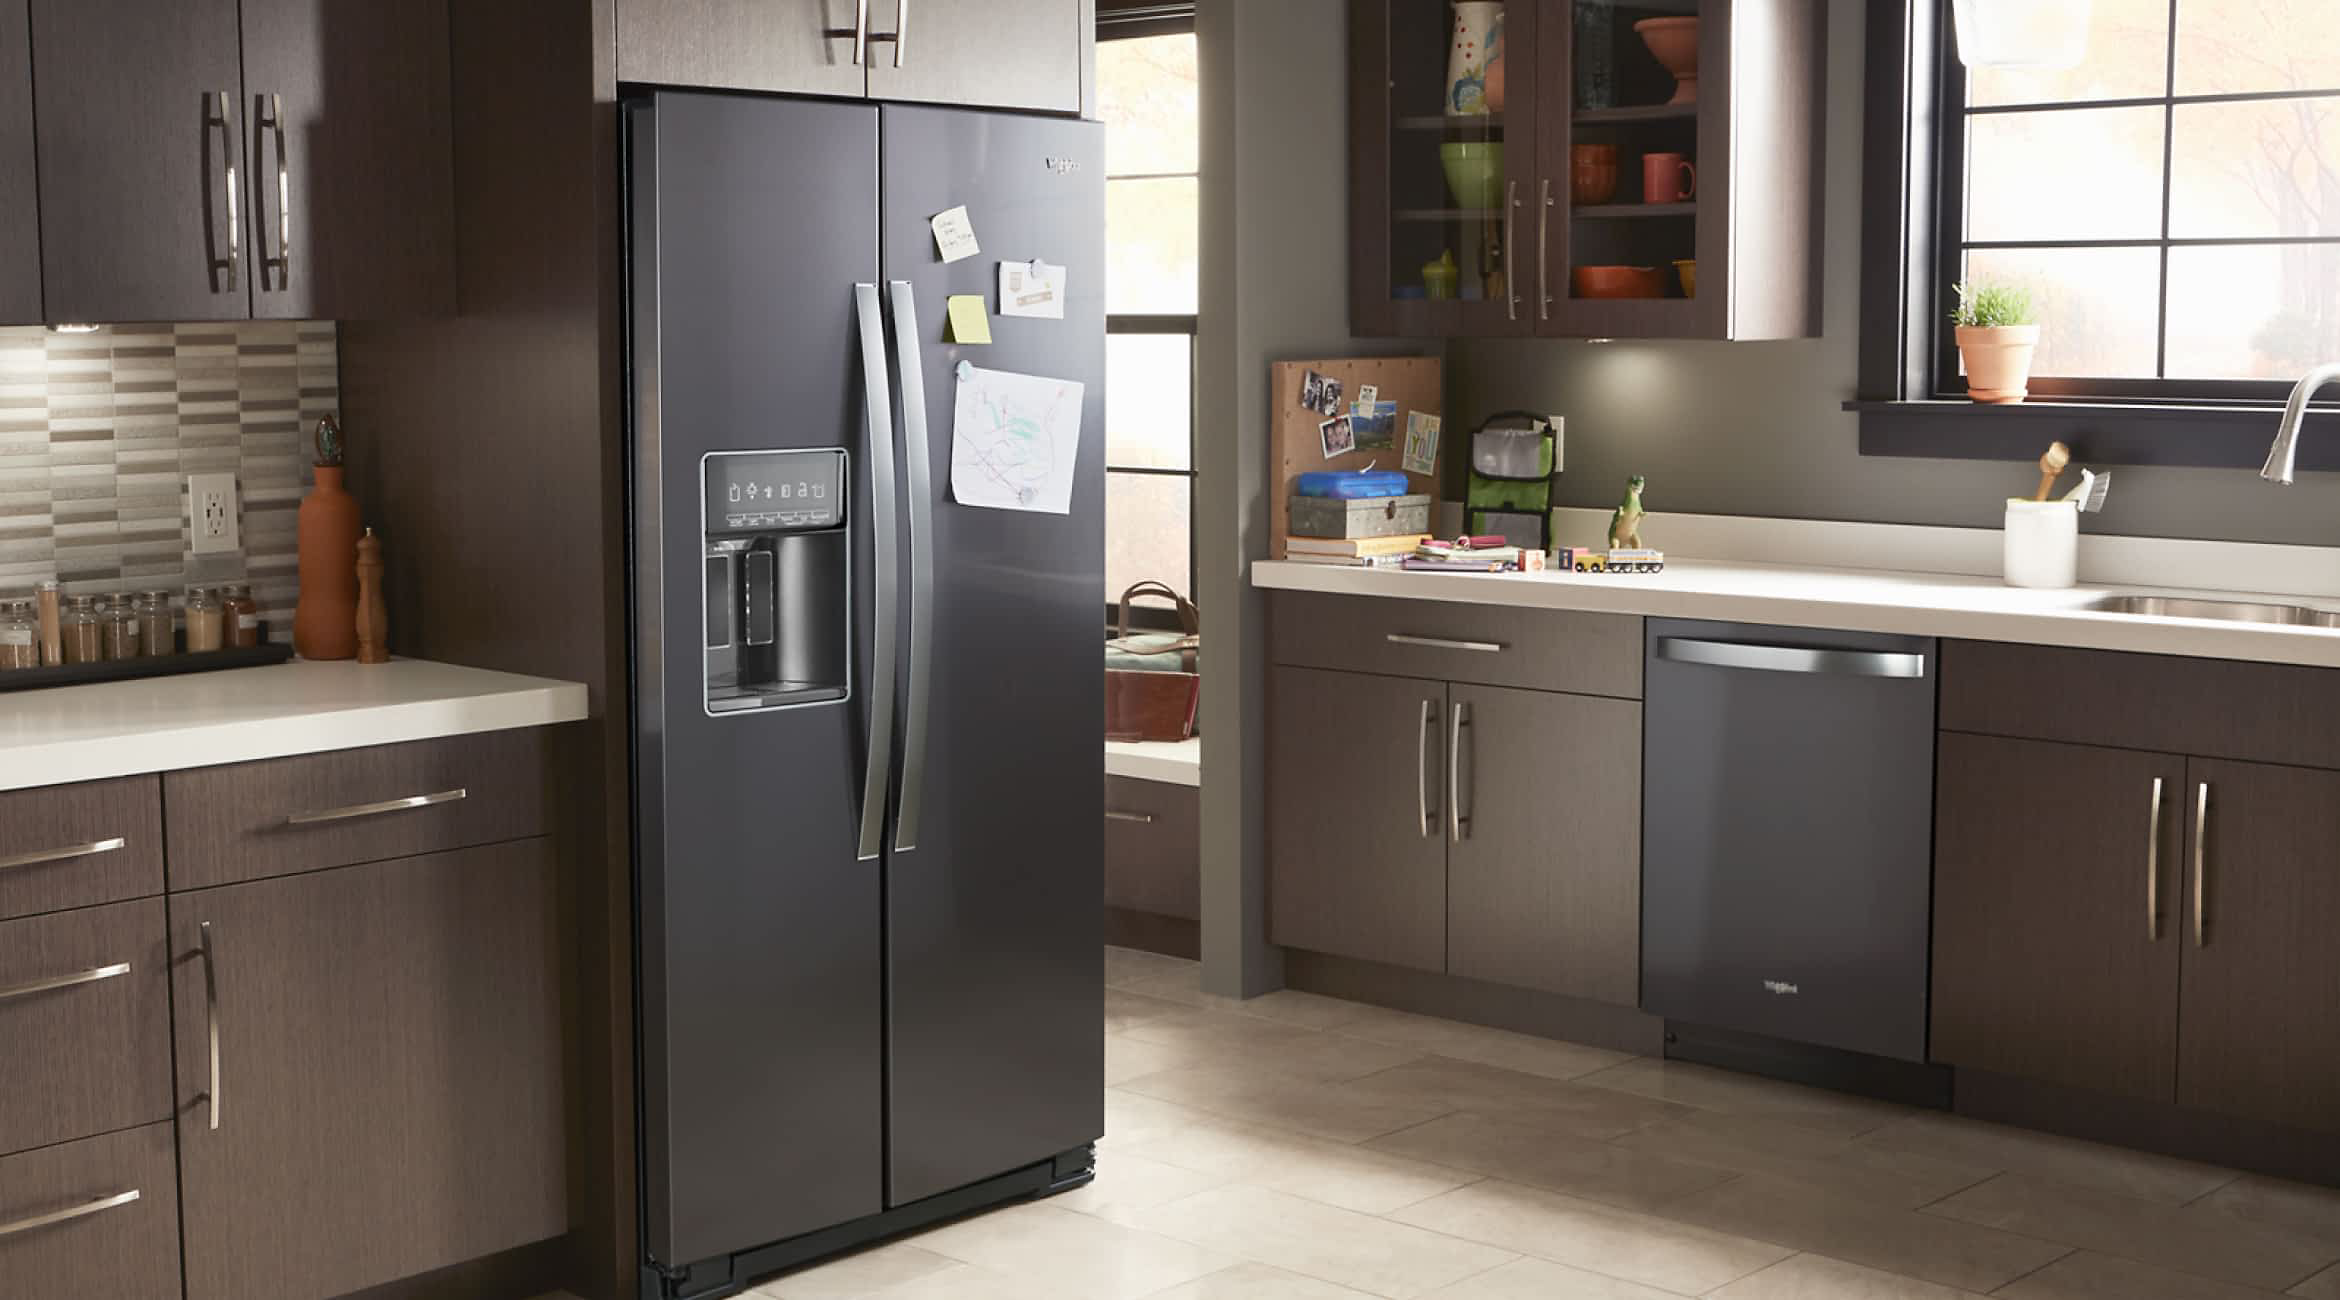 A Whirlpool® Side-by-Side Refrigerator in a modern kitchen